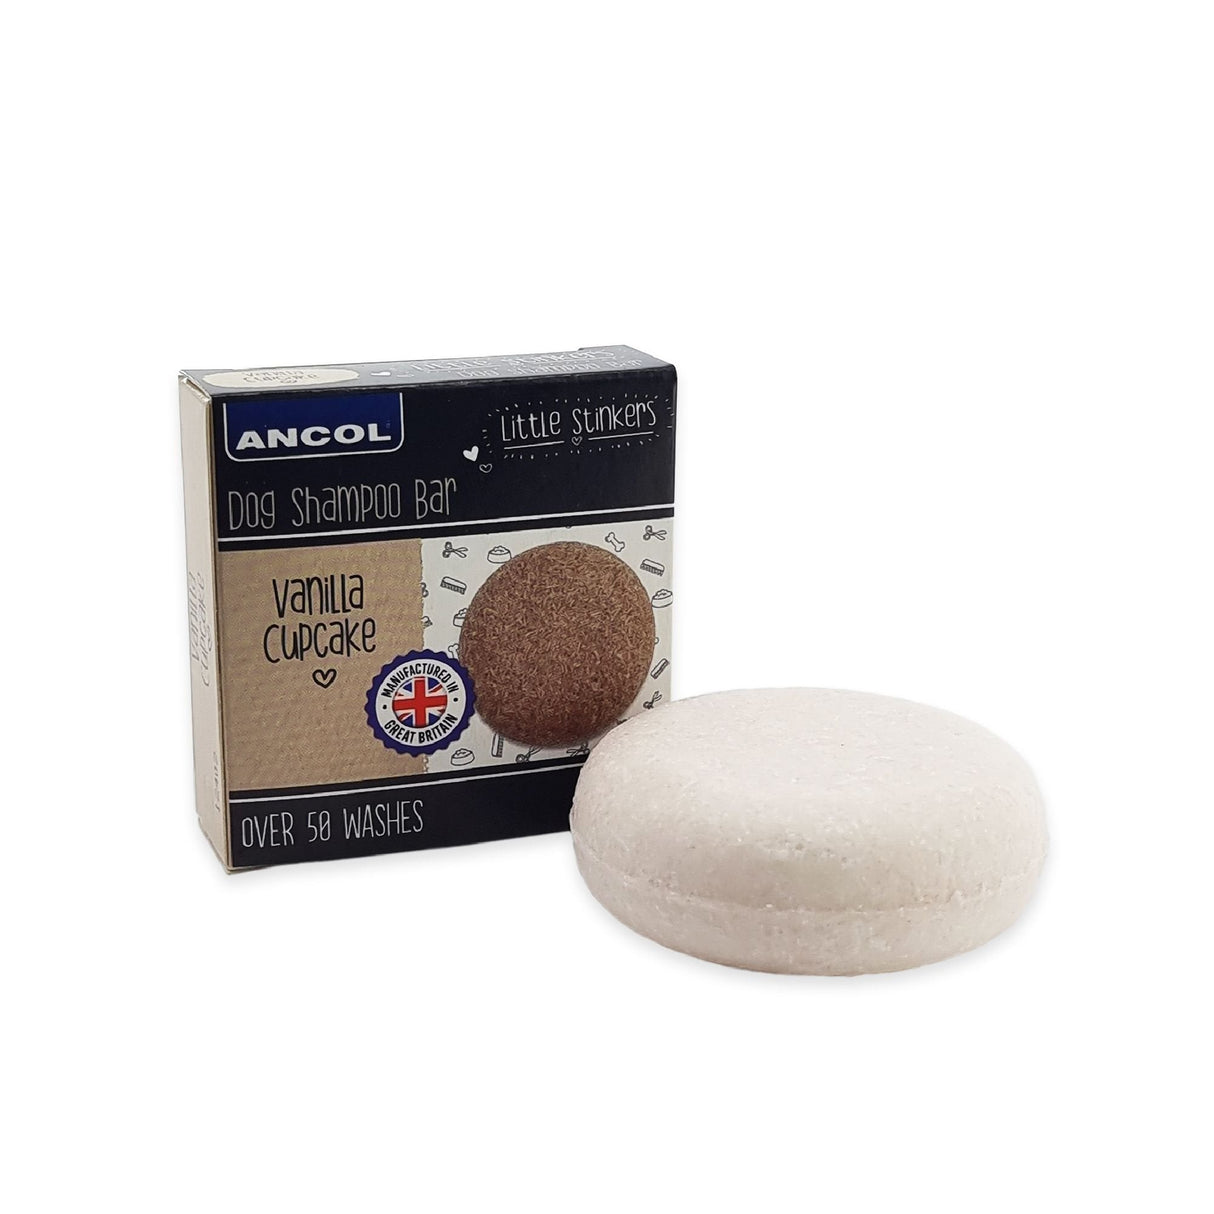 Ancol Little Stinkers Shampoo Bar for Dogs (6x50g), Ancol, Vanilla